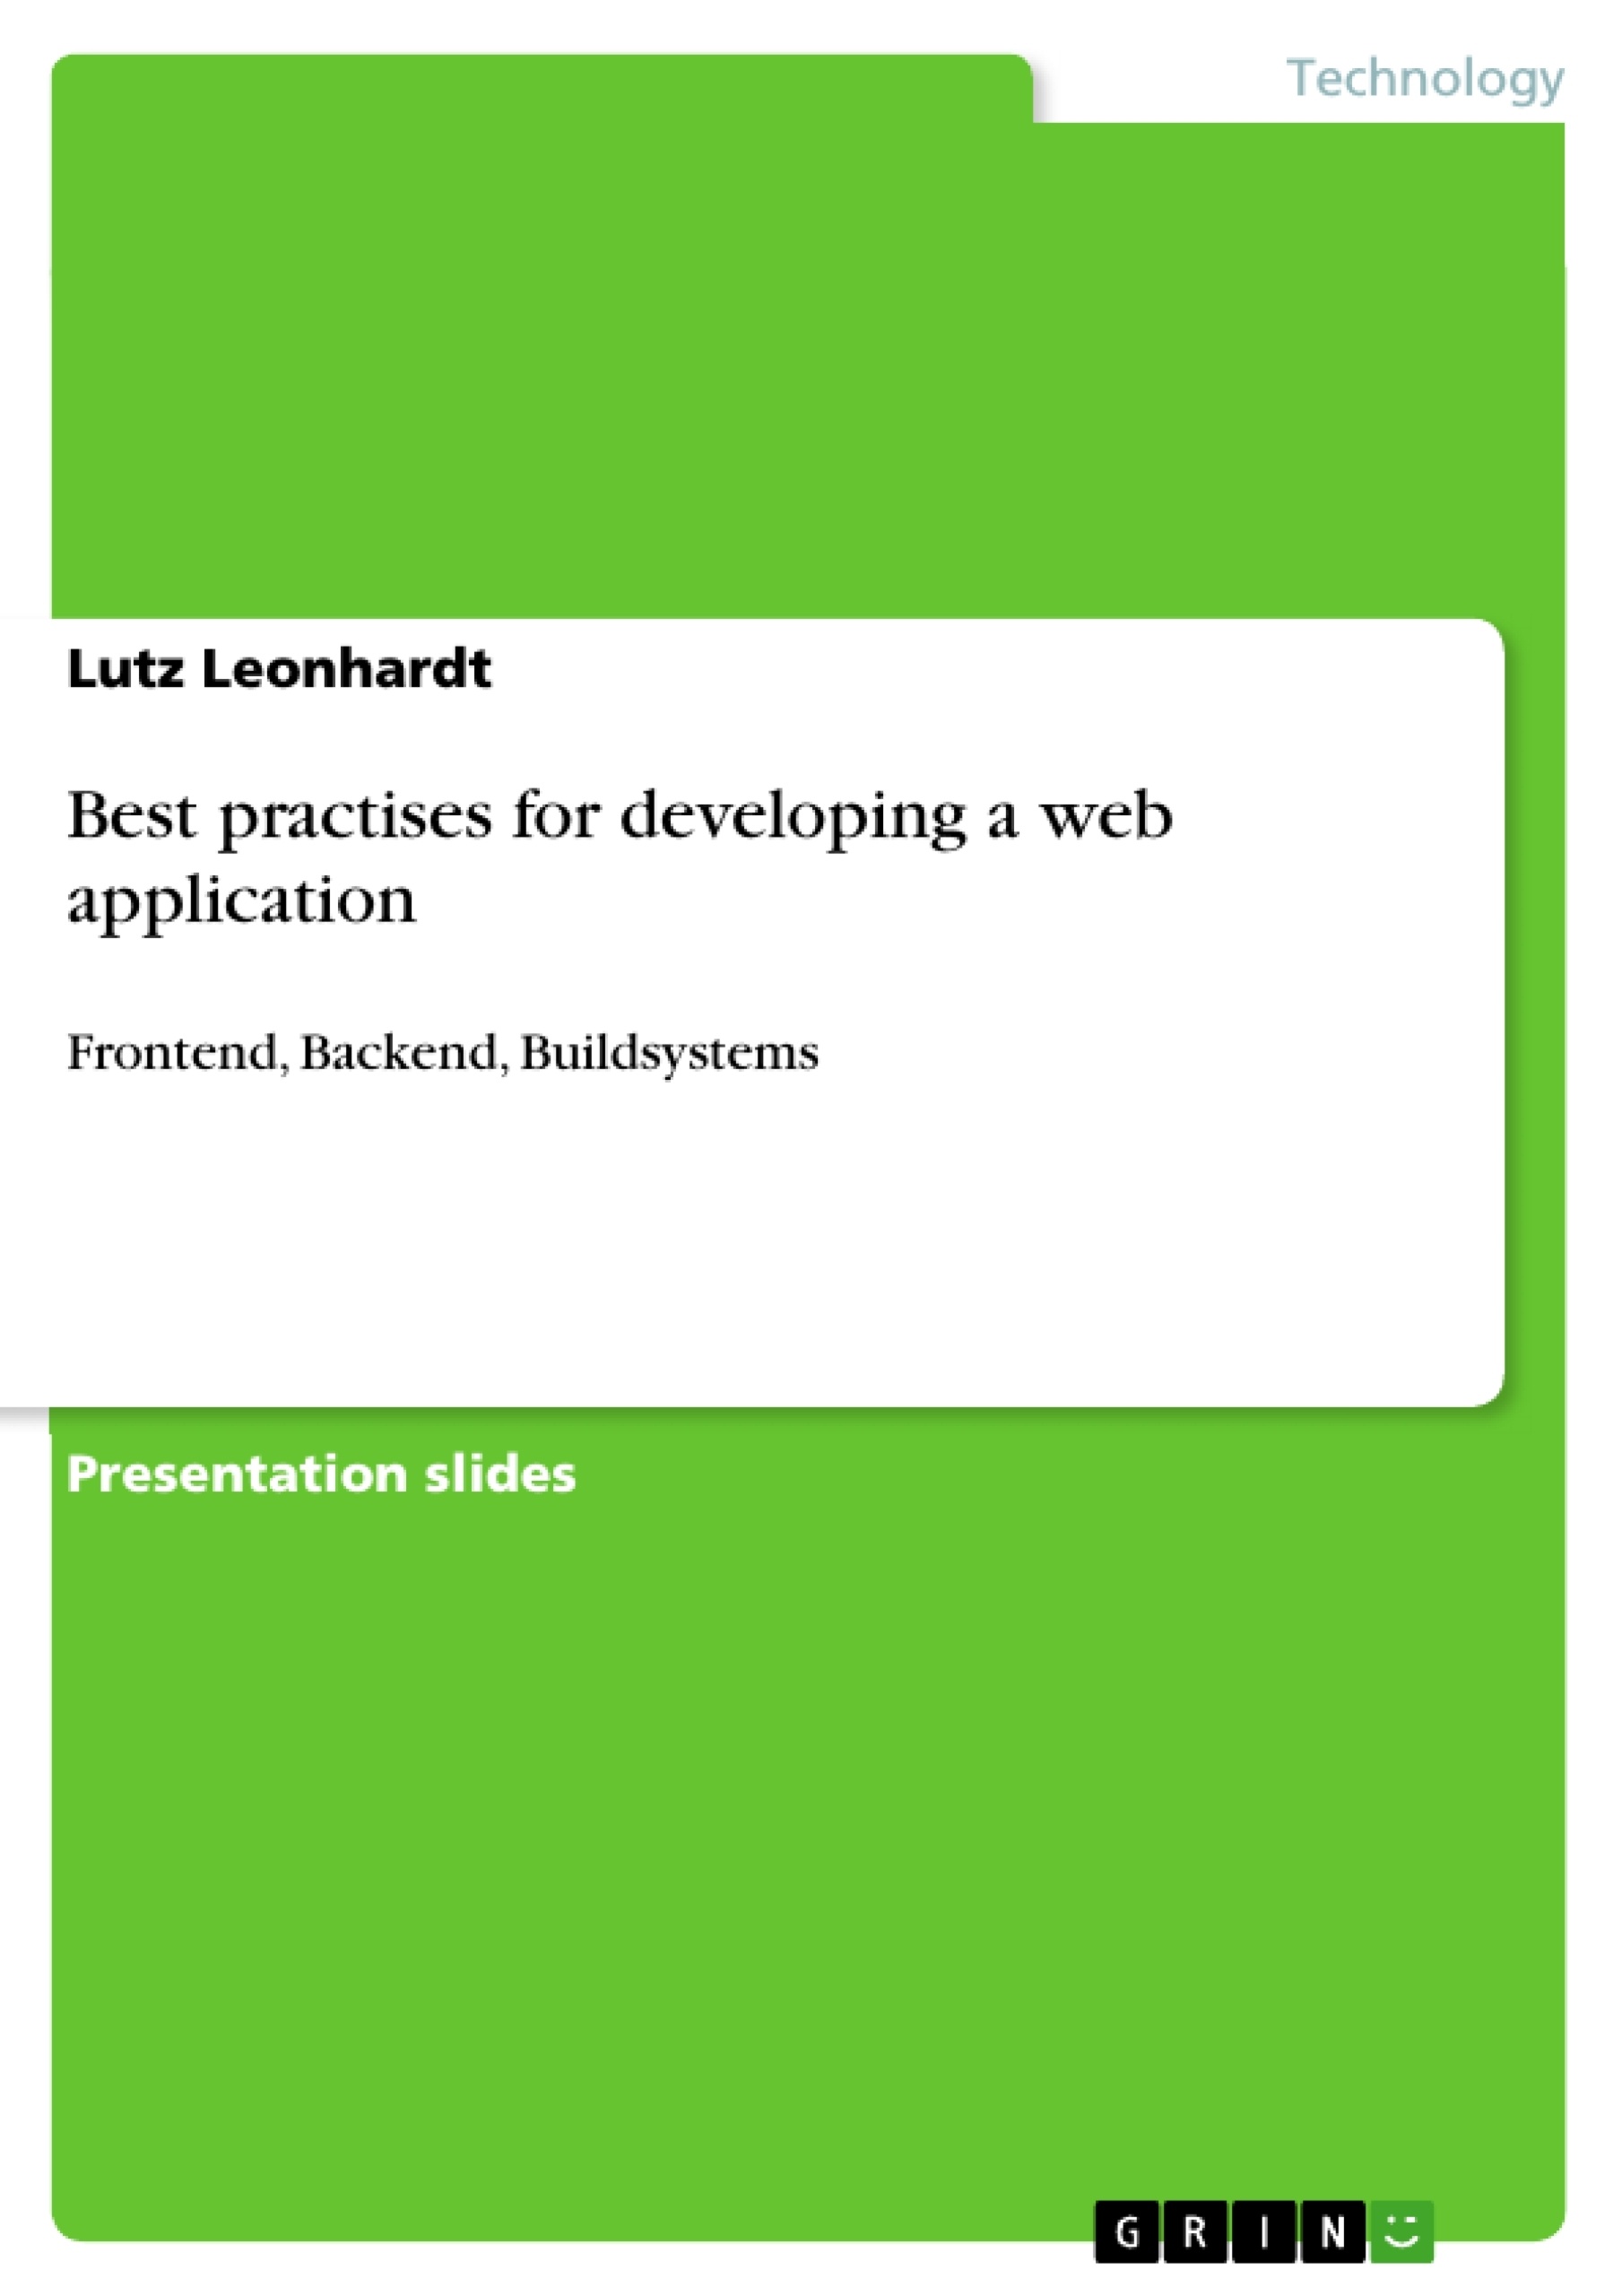 Título: Best practises for developing a web application